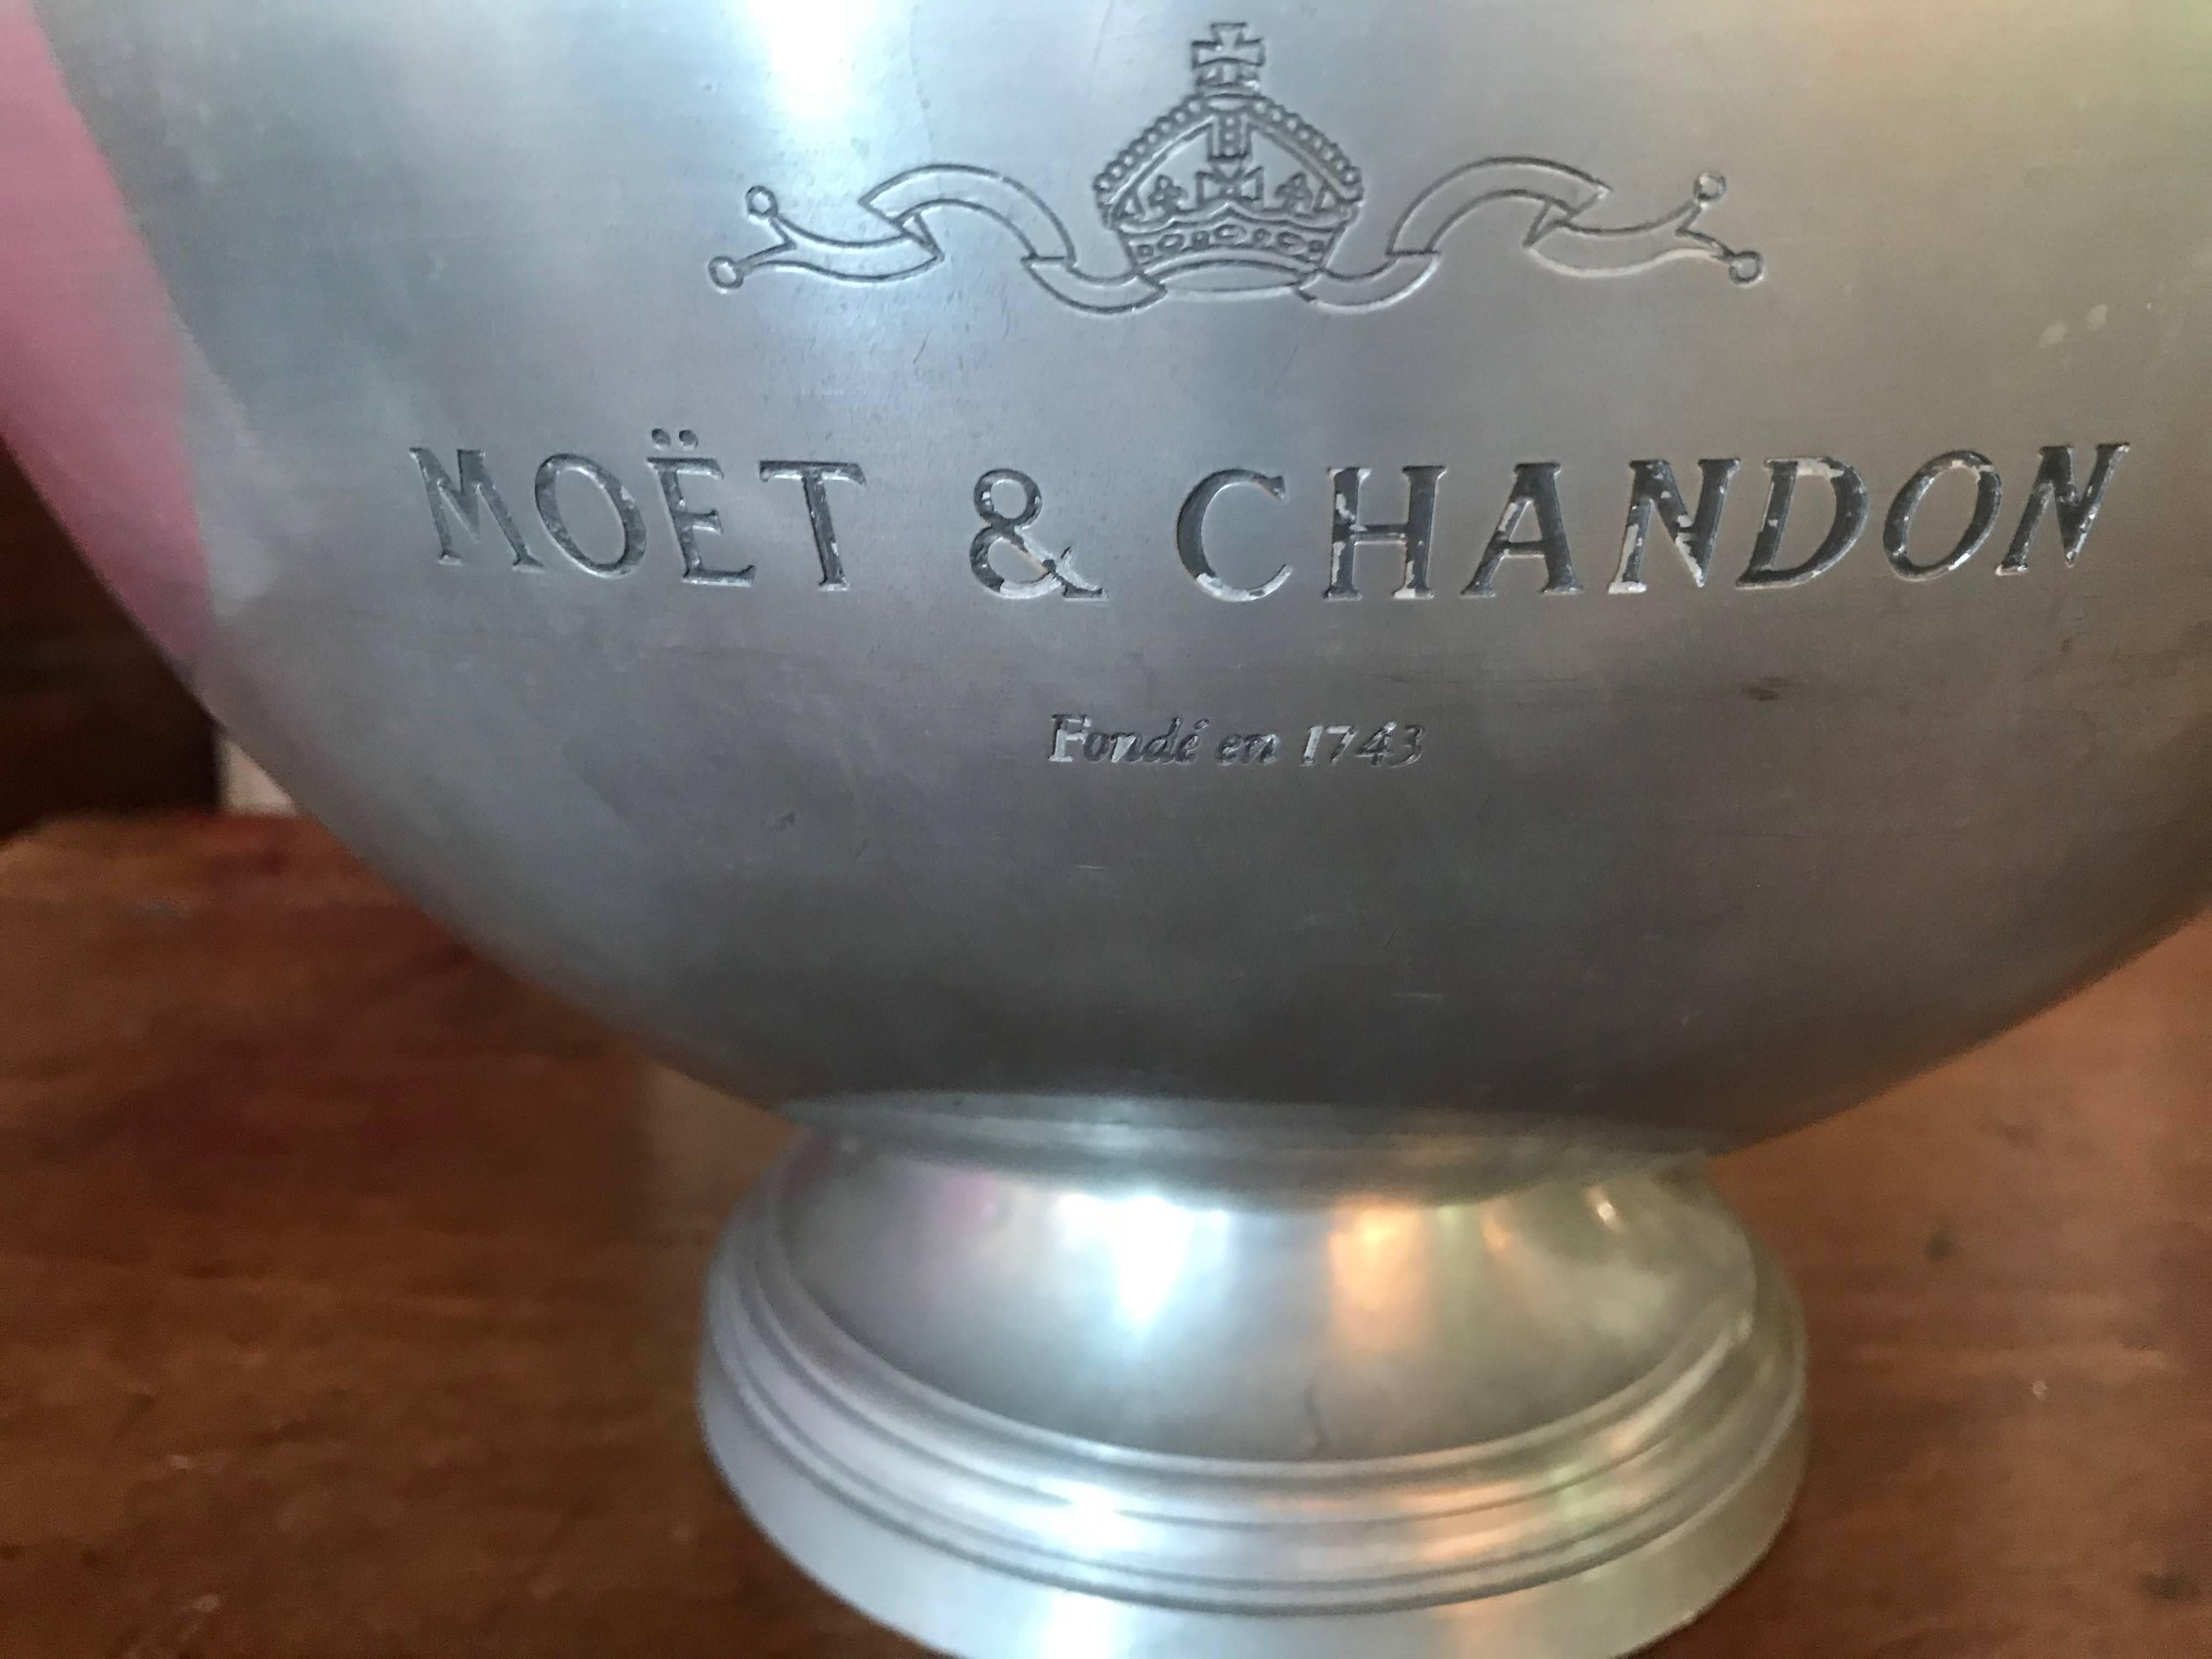 Early 20th century pewter bowl of impressive scale with makers mark of Moet & Chandon.